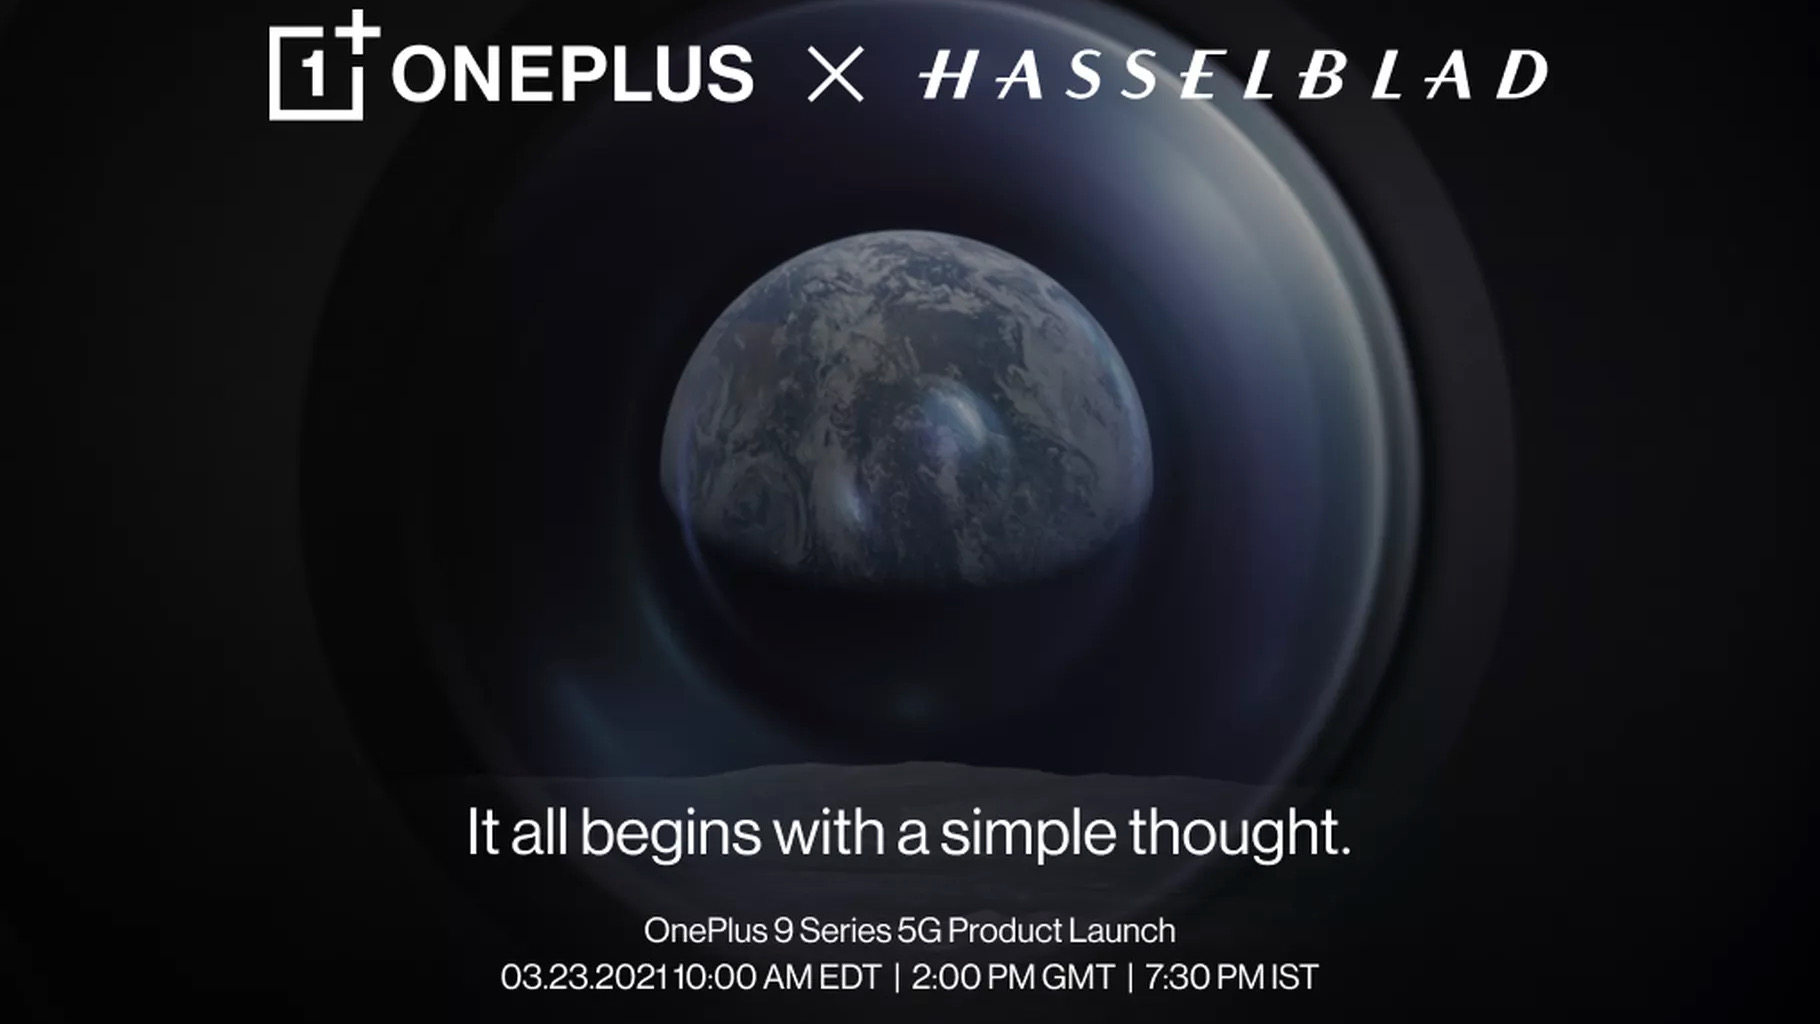 oneplus-9-to-launch-on-23rd-march-with-5g-and-hasselblad-camera